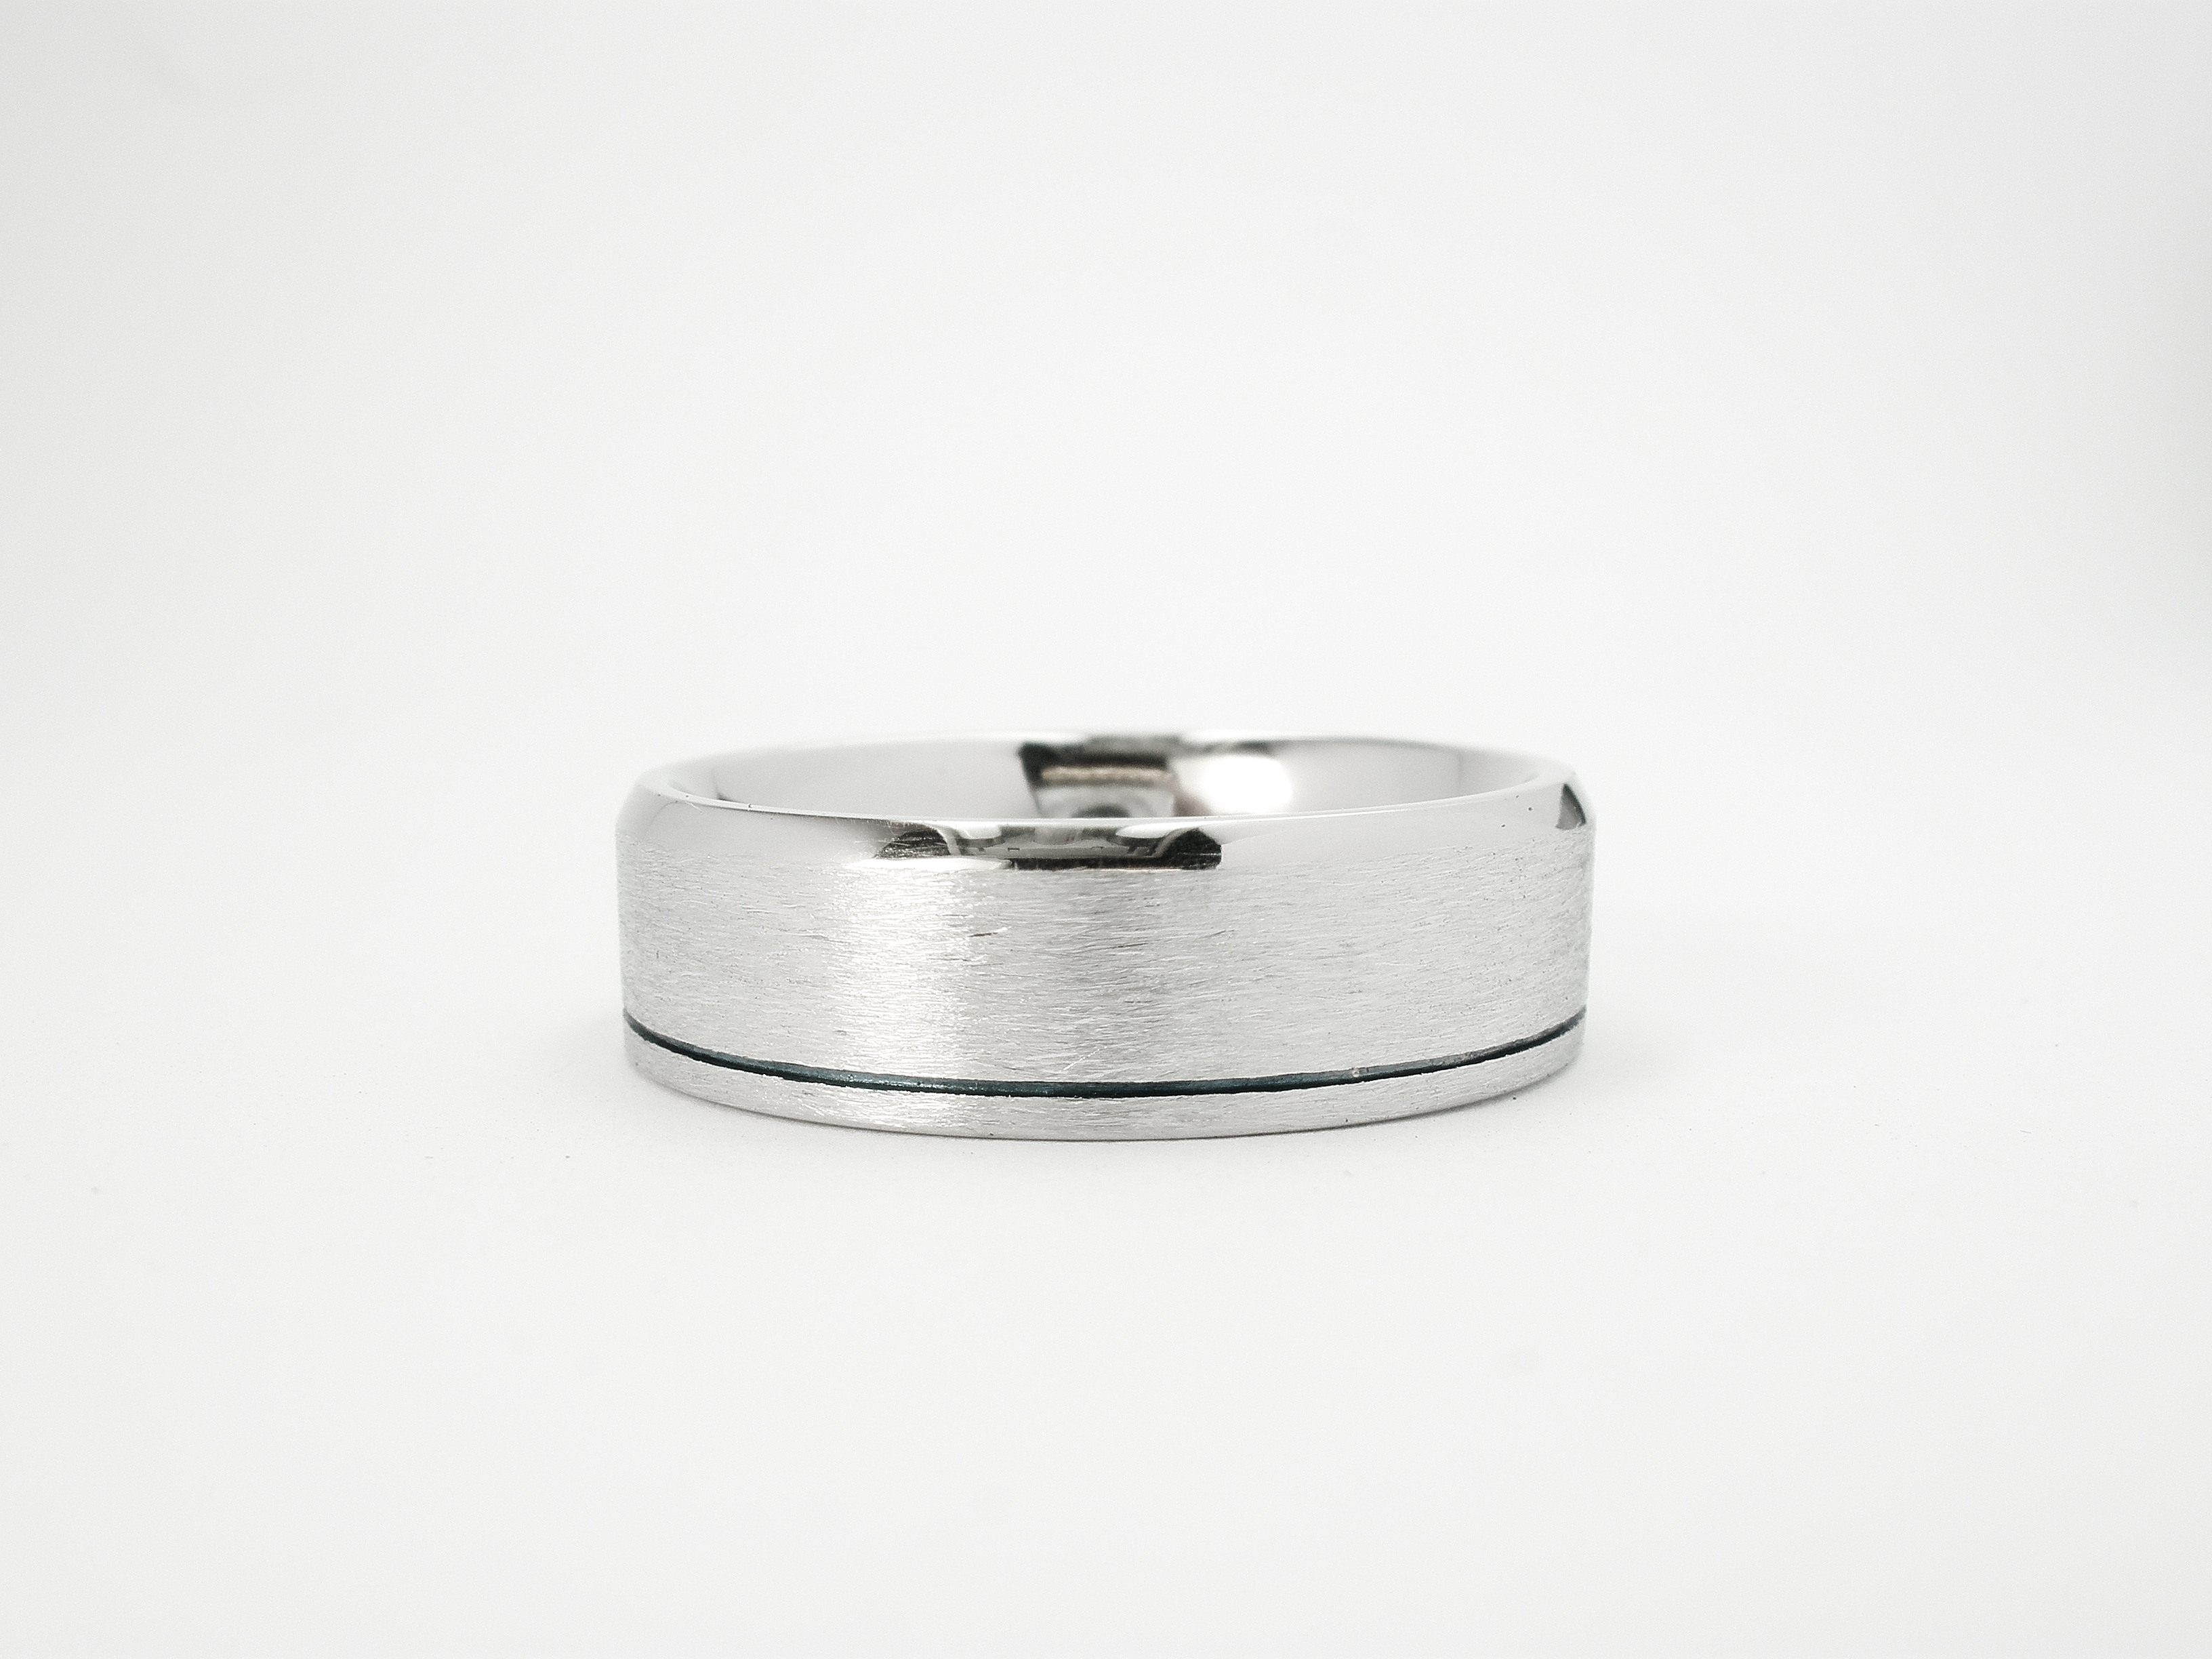 Gents palladium flat court sectioned wedding ring with a brushed finish & 1 polished bevelled edge and a darkened line cut inside the opposite edge.